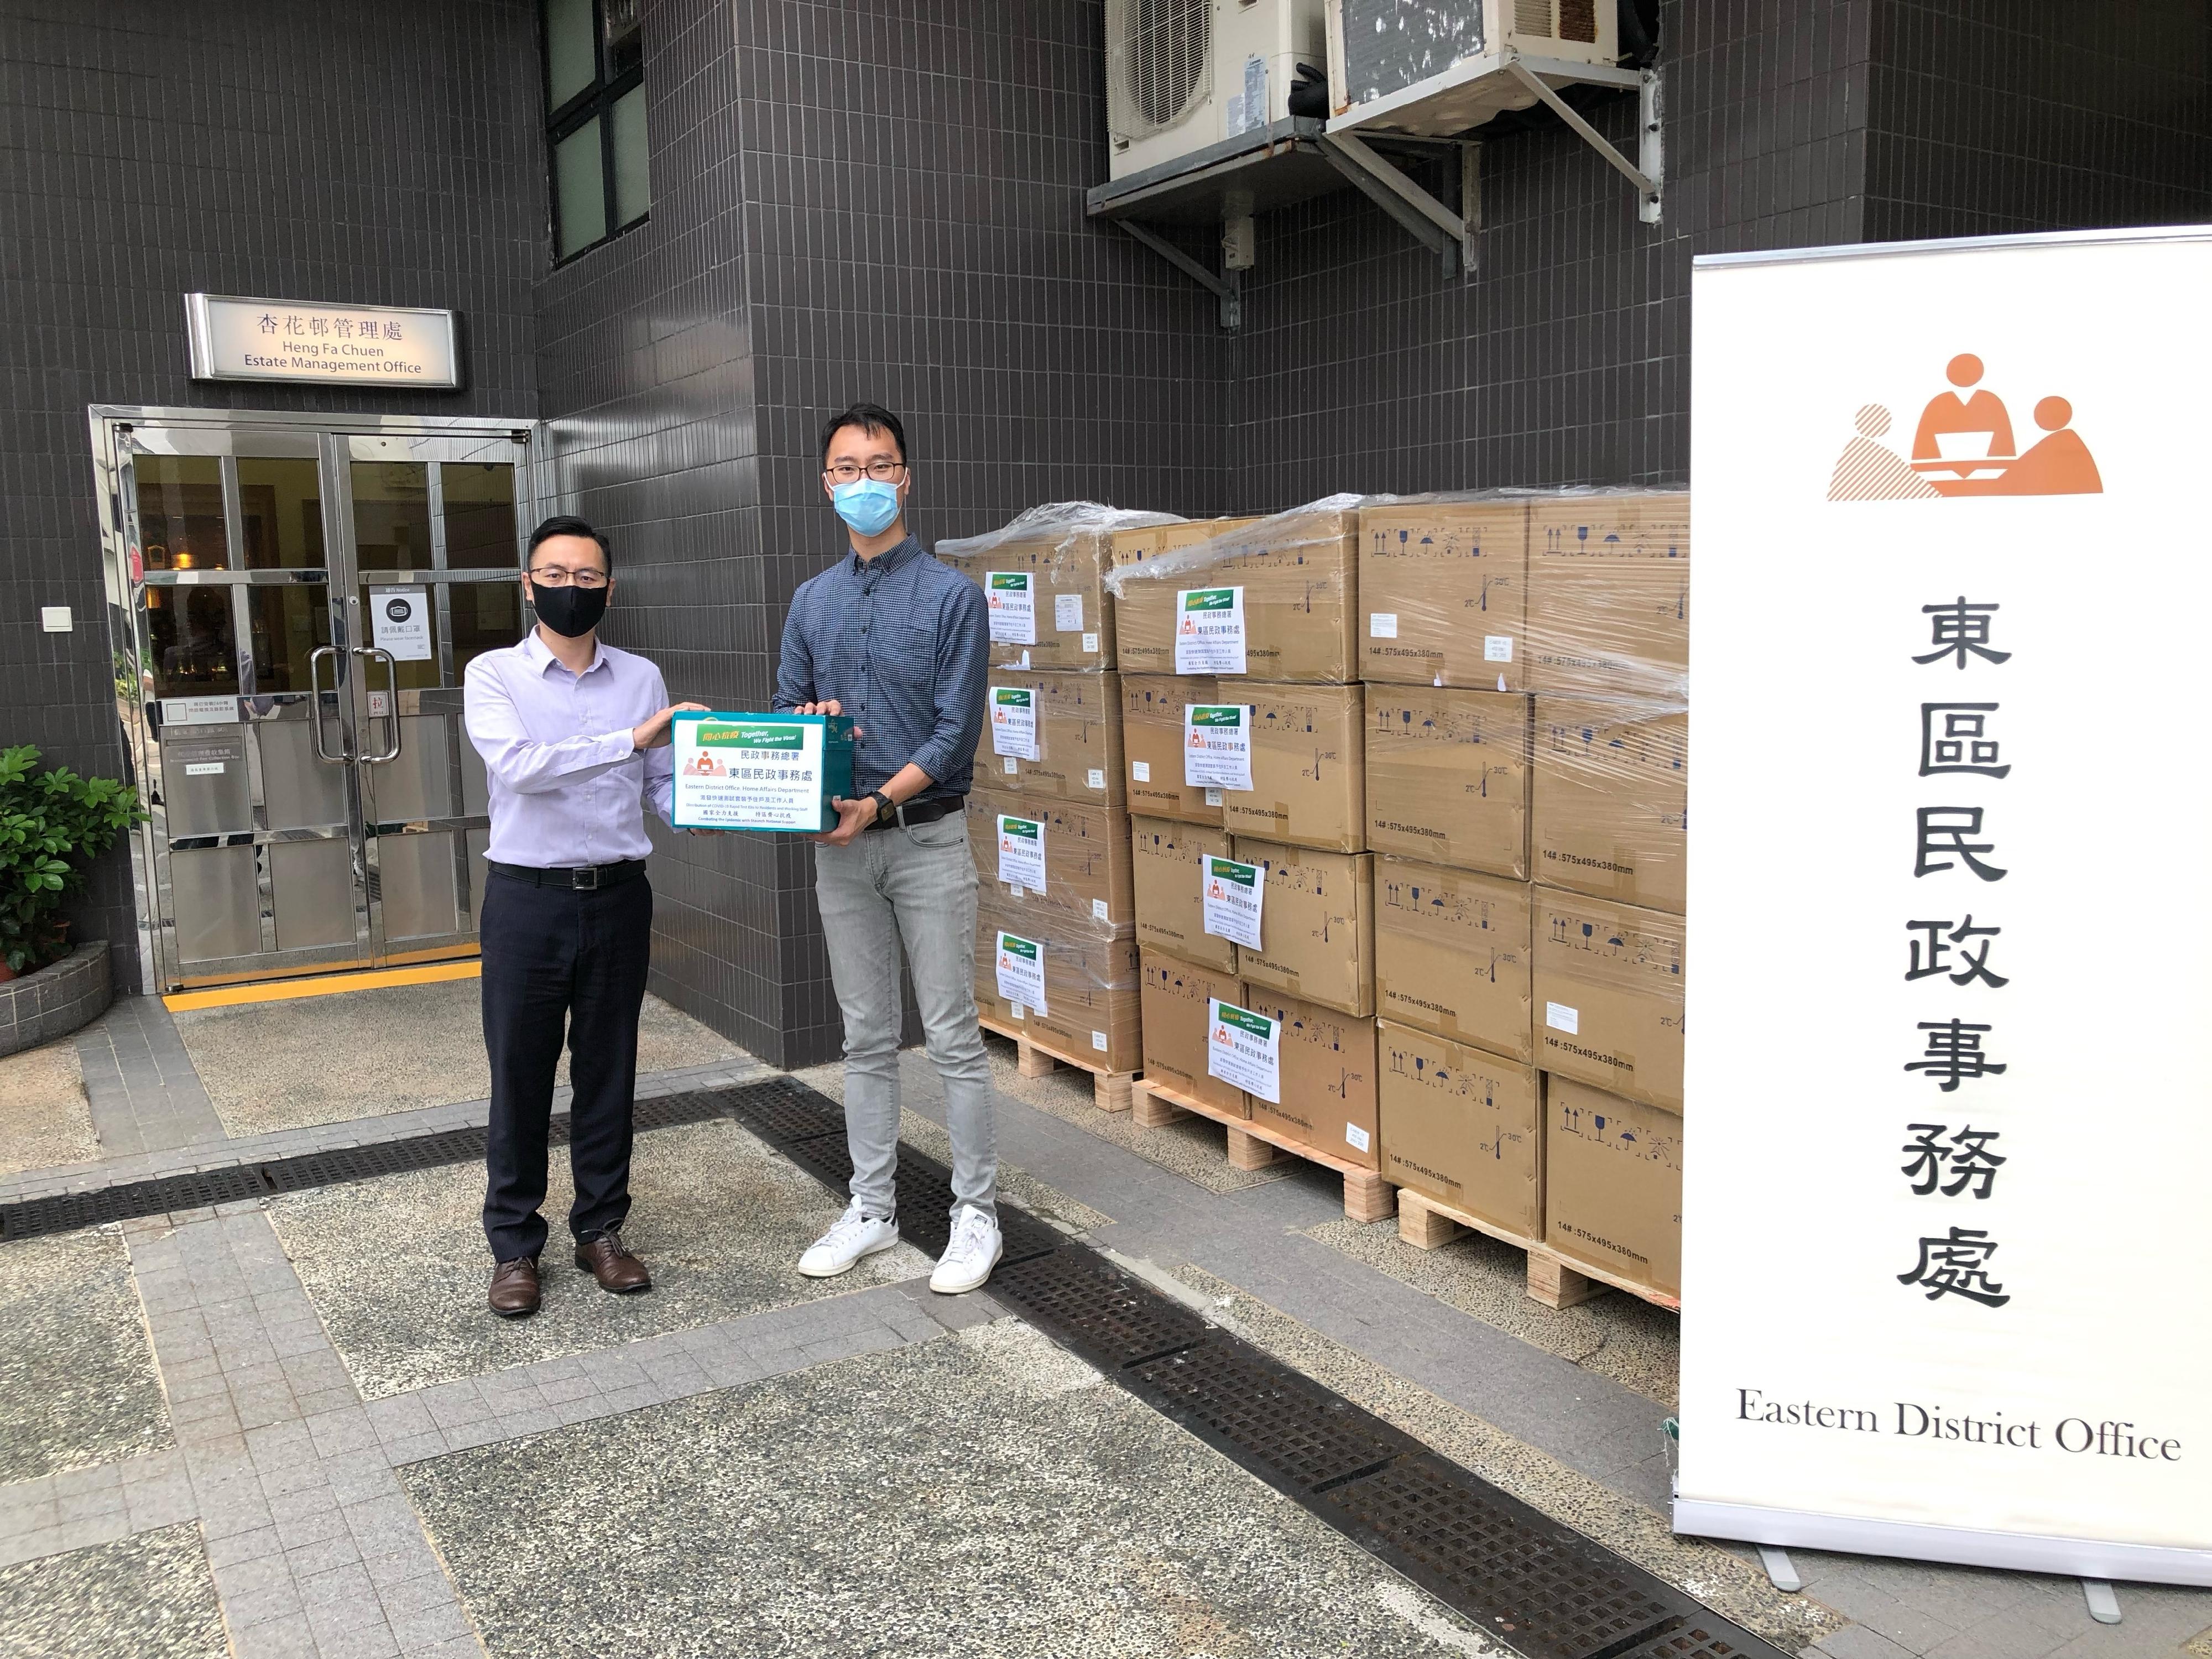 The Eastern District Office today (May 24) distributed COVID-19 rapid test kits to households, cleansing workers and property management staff living and working in Heng Fa Chuen for voluntary testing through the property management company.